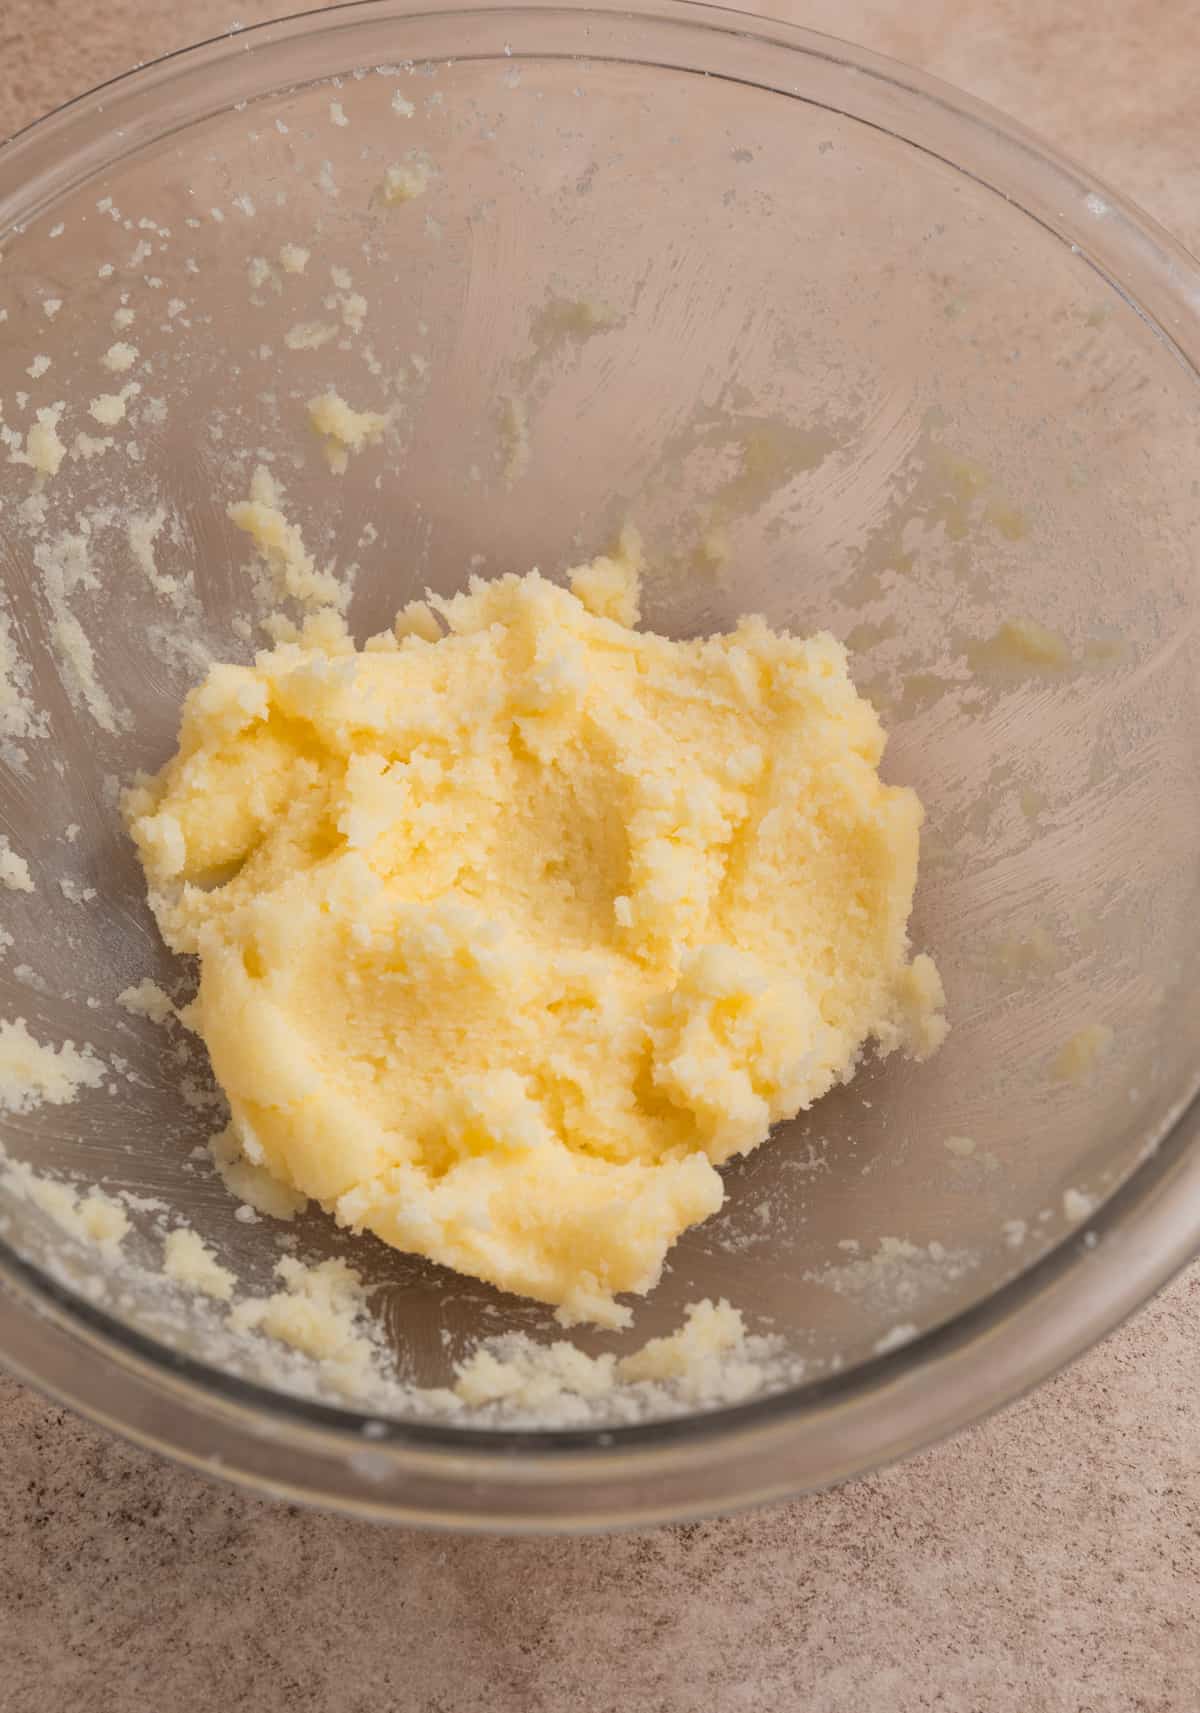 Creamed butter and sugar in glass mixing bowl